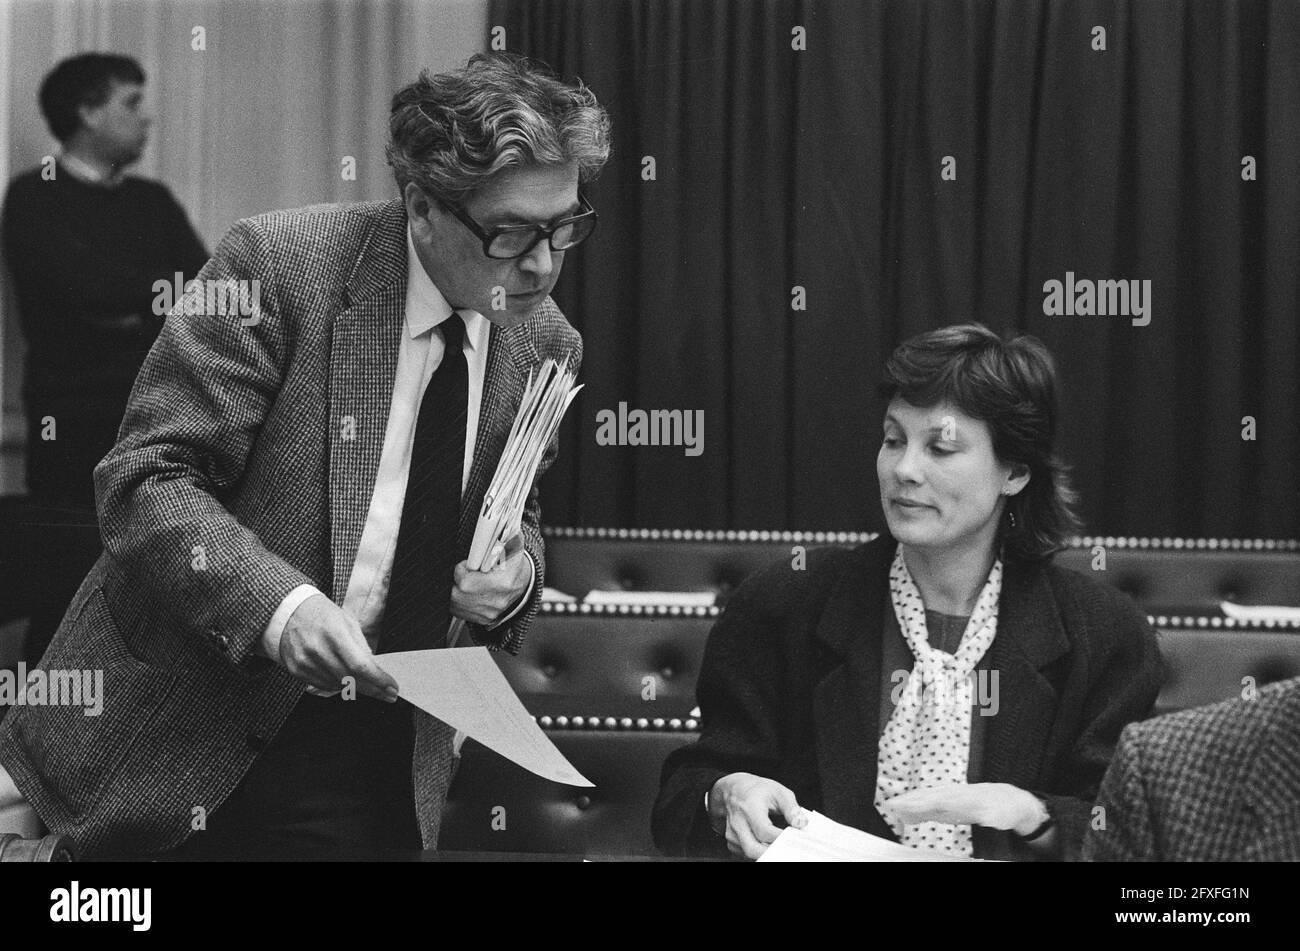 Lower House; debate on placement of cruise missiles; PSP members Fred van der Spek and Andrée van Es, November 12, 1985, debates, cruise missiles, The Netherlands, 20th century press agency photo, news to remember, documentary, historic photography 1945-1990, visual stories, human history of the Twentieth Century, capturing moments in time Stock Photo